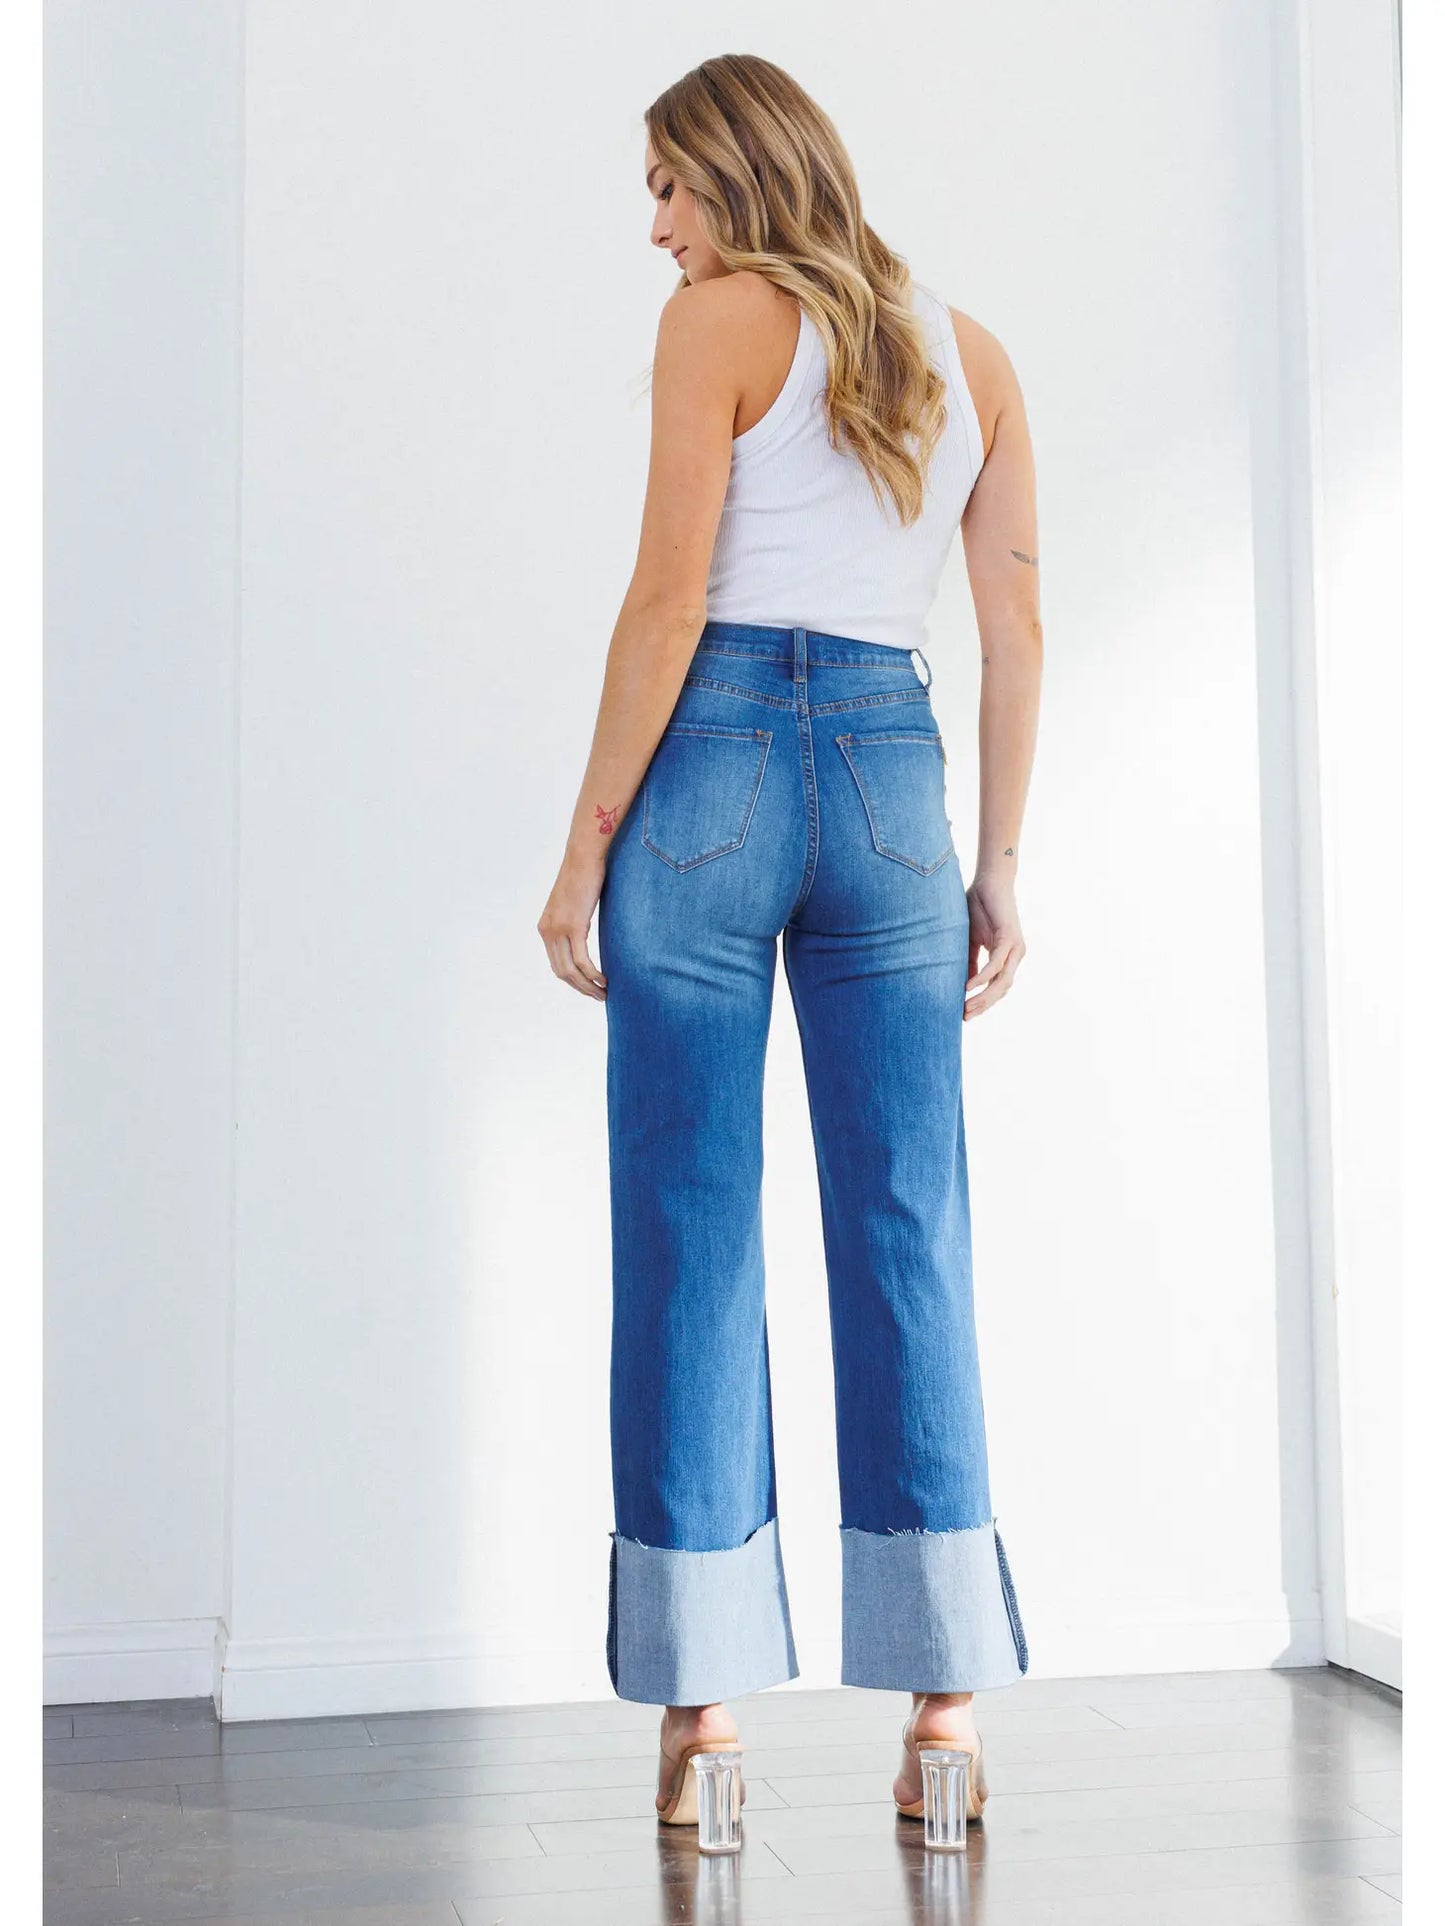 Back To School Wide Jeans